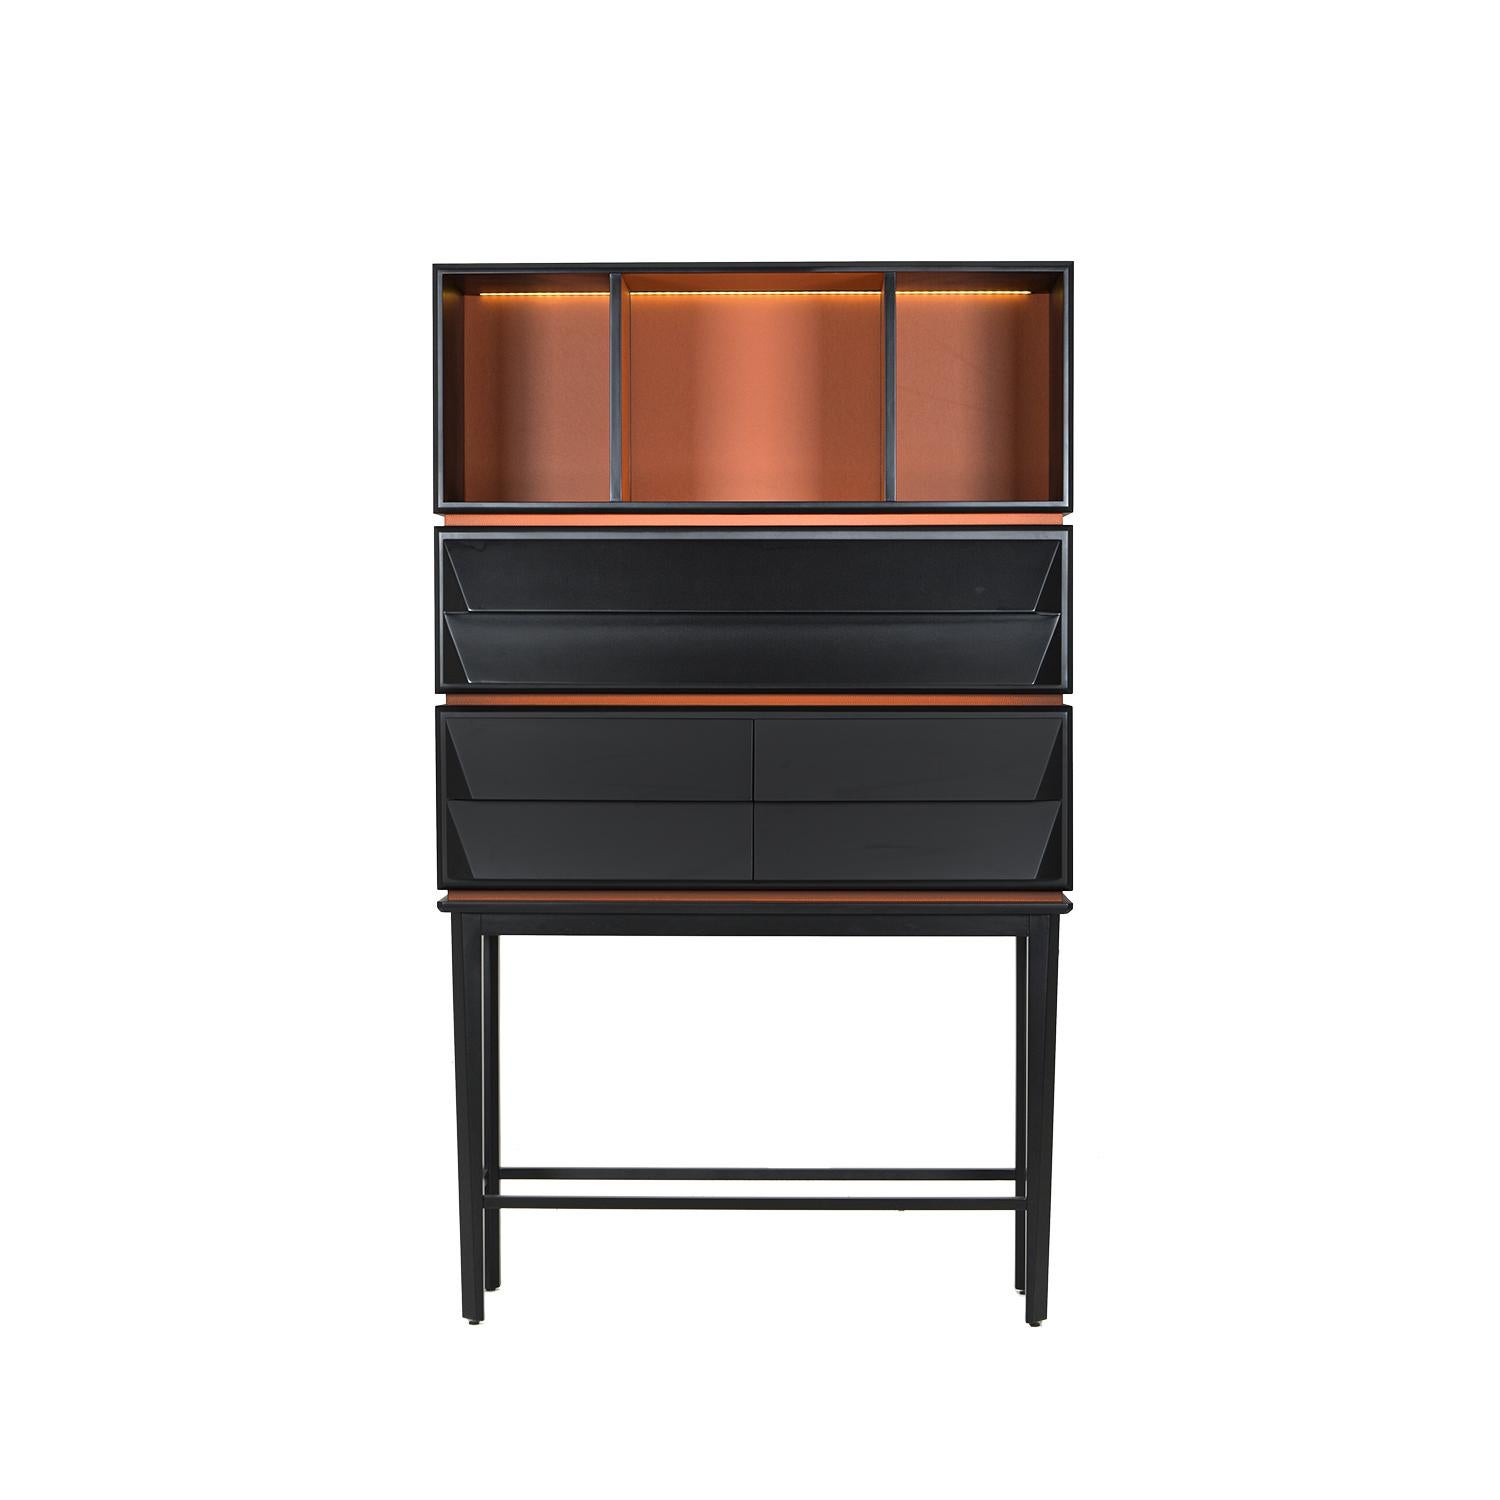 Made of three different modules, each one has a different function to serve the user in the best possible way. This modern cabinet will showcase your collection of liquor in an outstanding way that you can choose to light up or not.